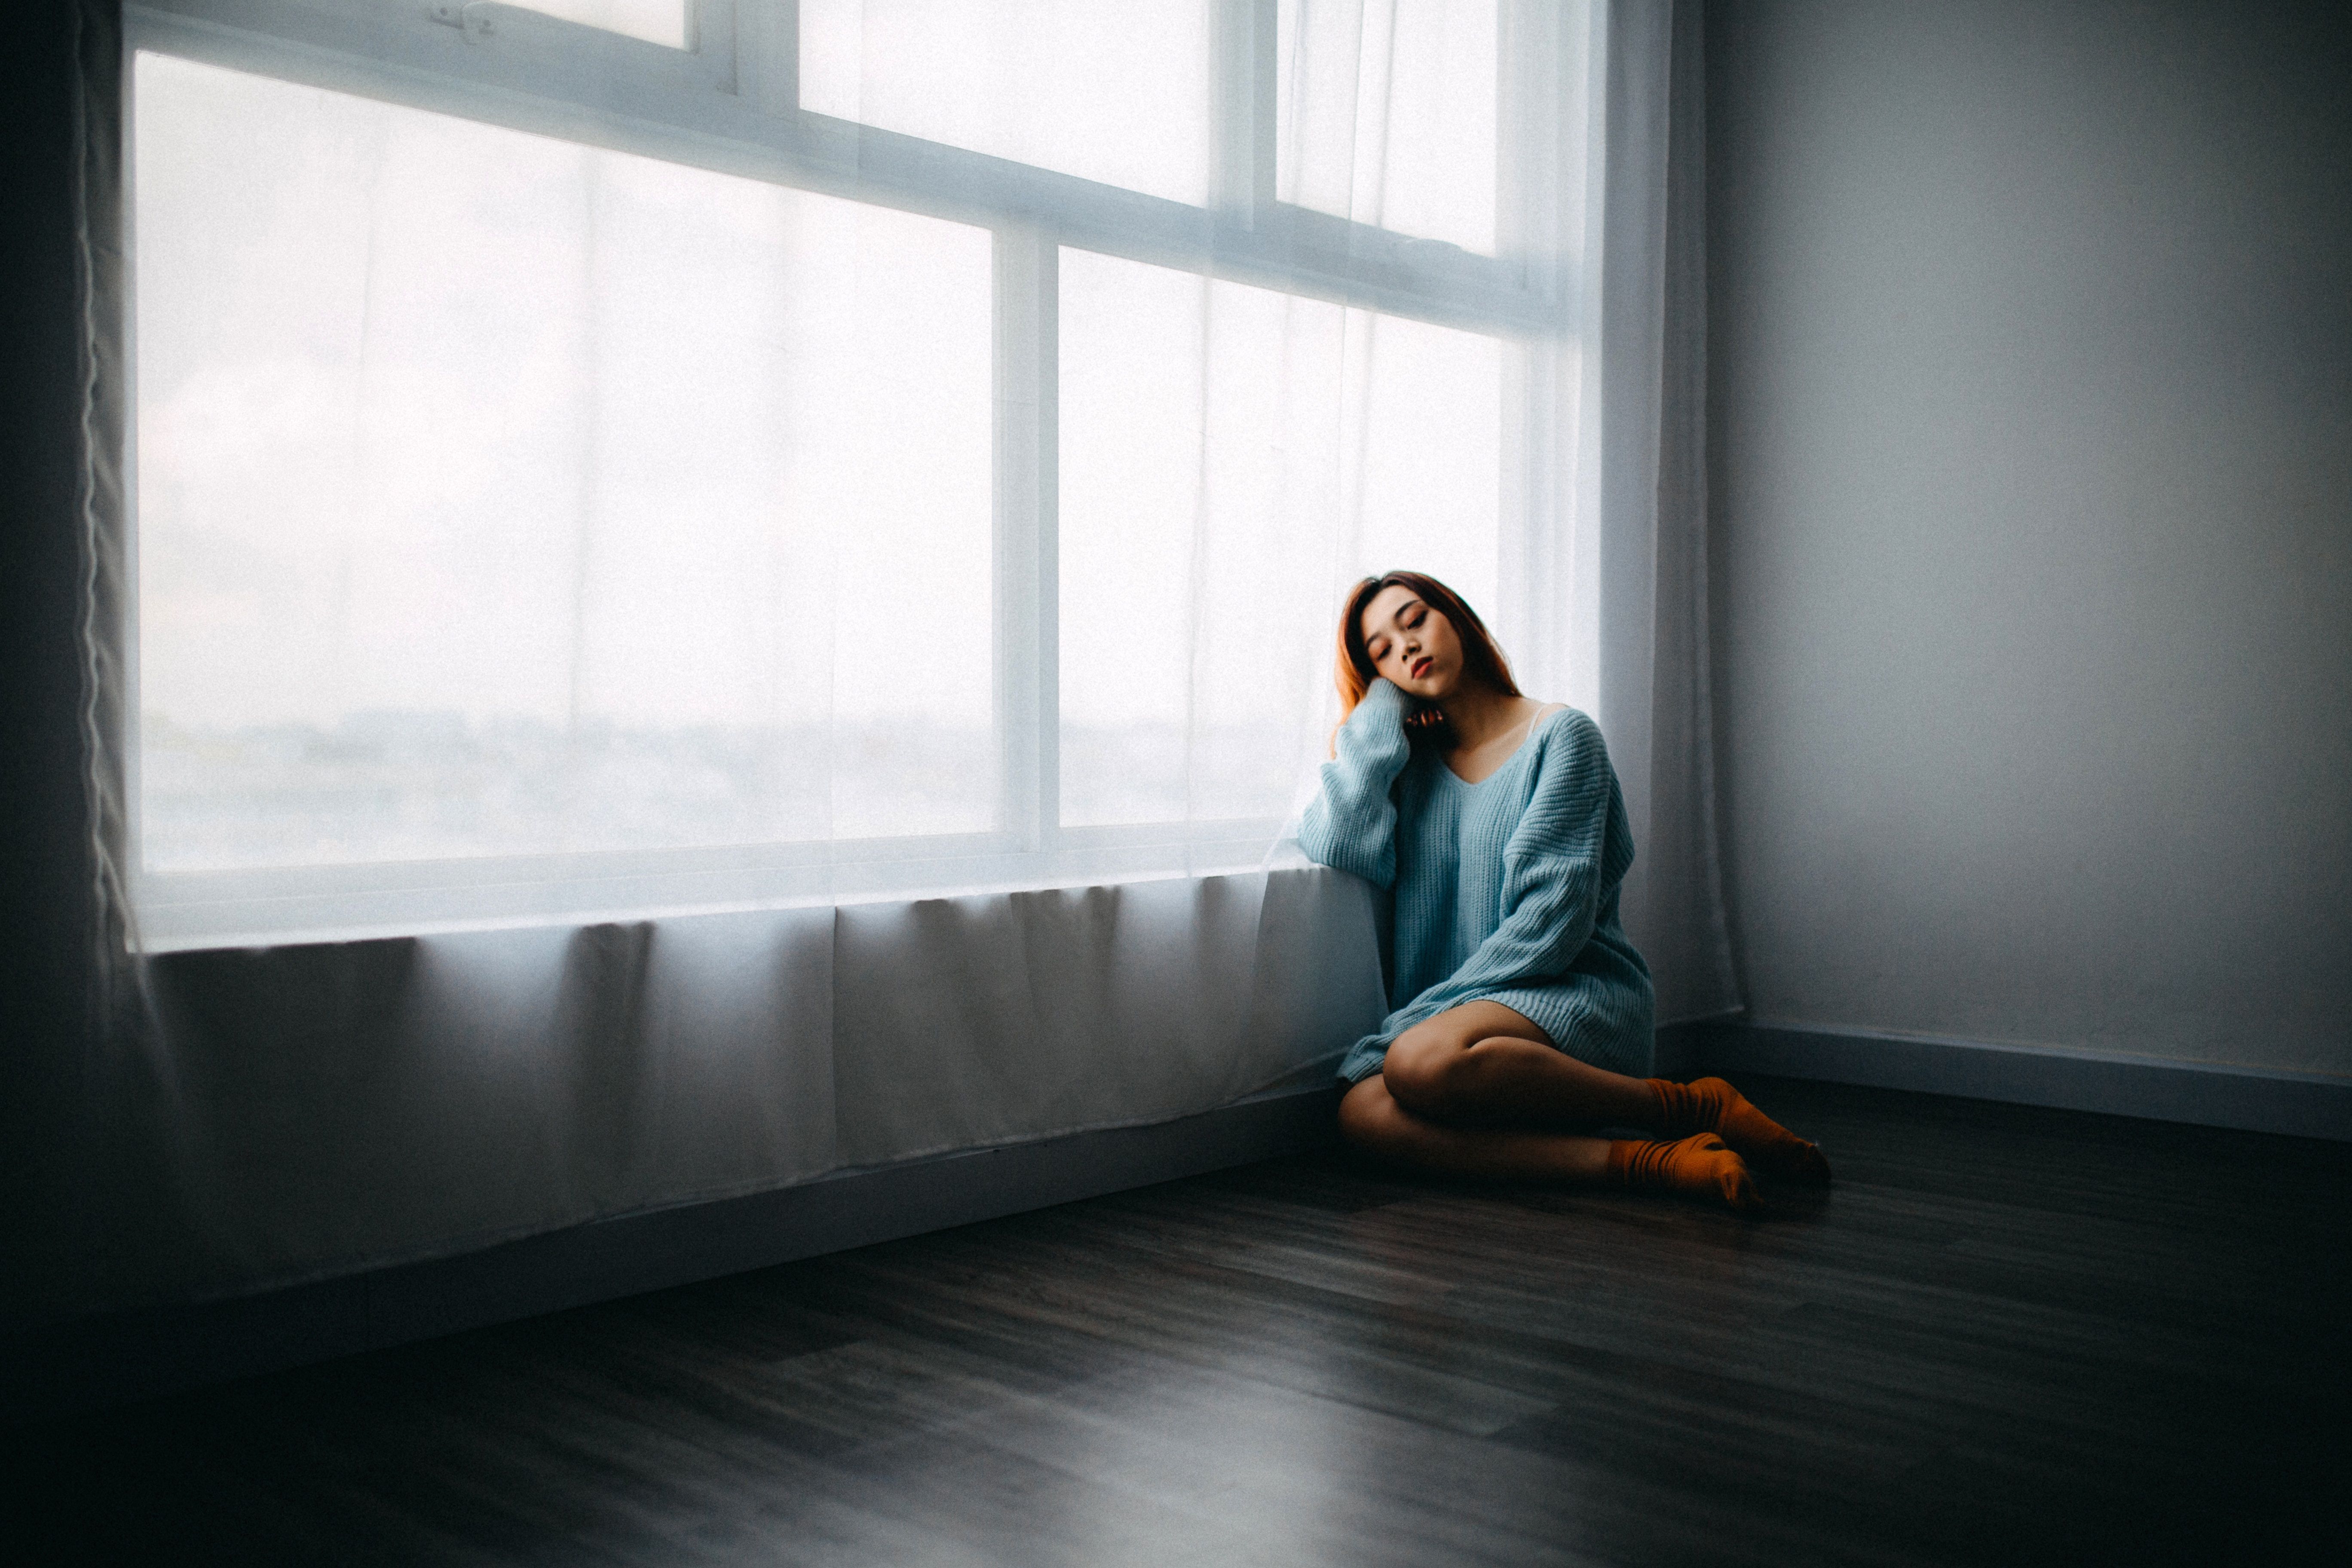 5472x3648 #emotion, #person, #empty, #girl, #sad, #female, #solitude, #room, #sitting, #portrait, #think, #woman, #alone, #Public domain image, #sadness, #dreamer, #young, #thinking, #lonely, #inaroom, #window. Mocah HD Wallpaper